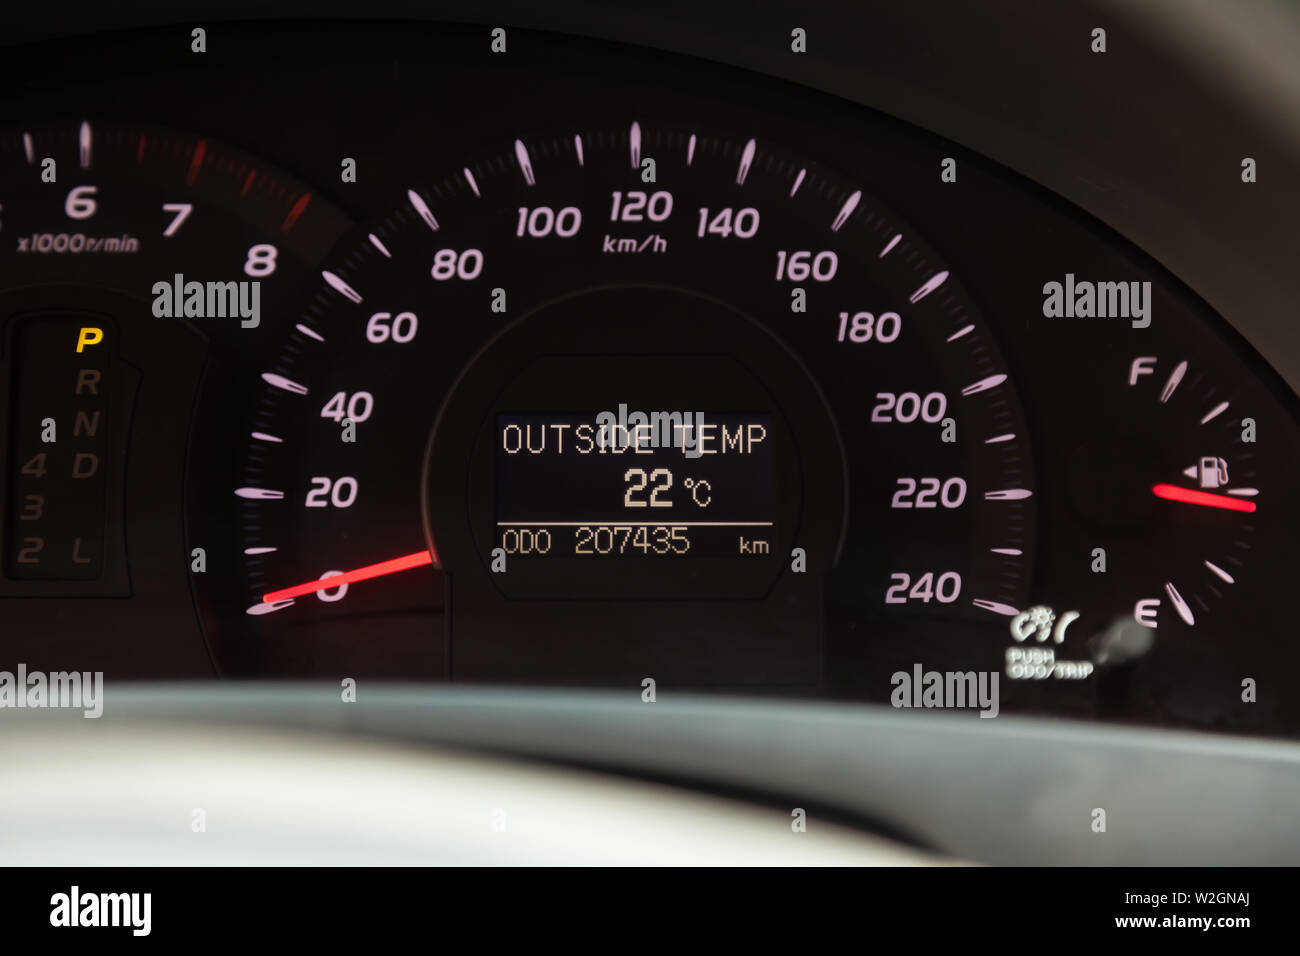 Novosibirsk, Russia - 07.09.2019: View to the interior of Toyota Camry 2006 with dashboard, speedometer, odometer and red arrows after cleaning before Stock Photo